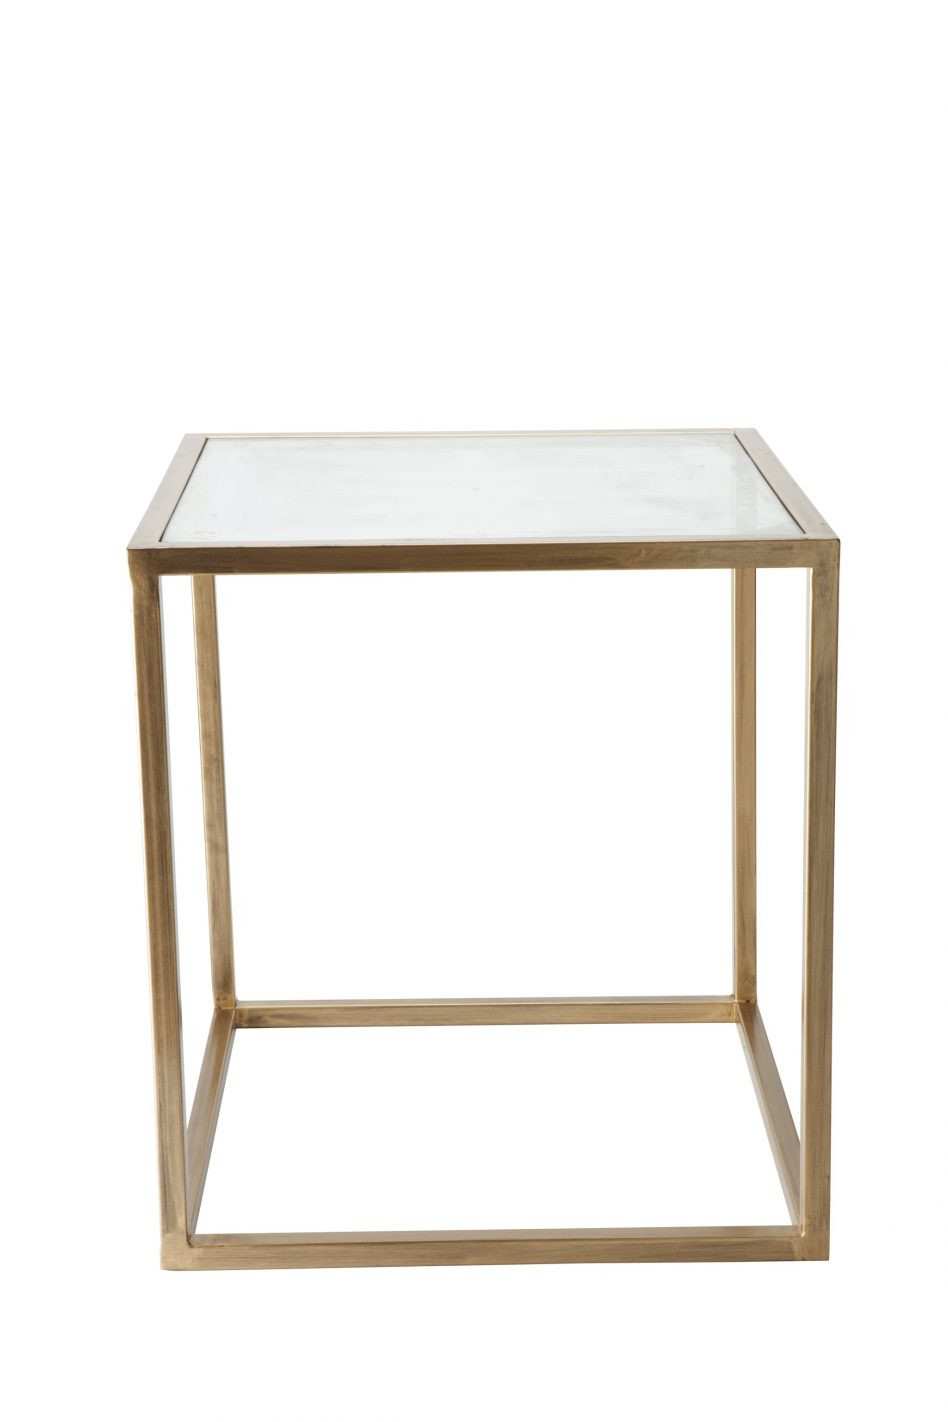 trendy small side table target for tar flossy newest furniture product brass accent ott legs ashley entertainment centers ikea glass coffee acacia comfortable porch metal stacking